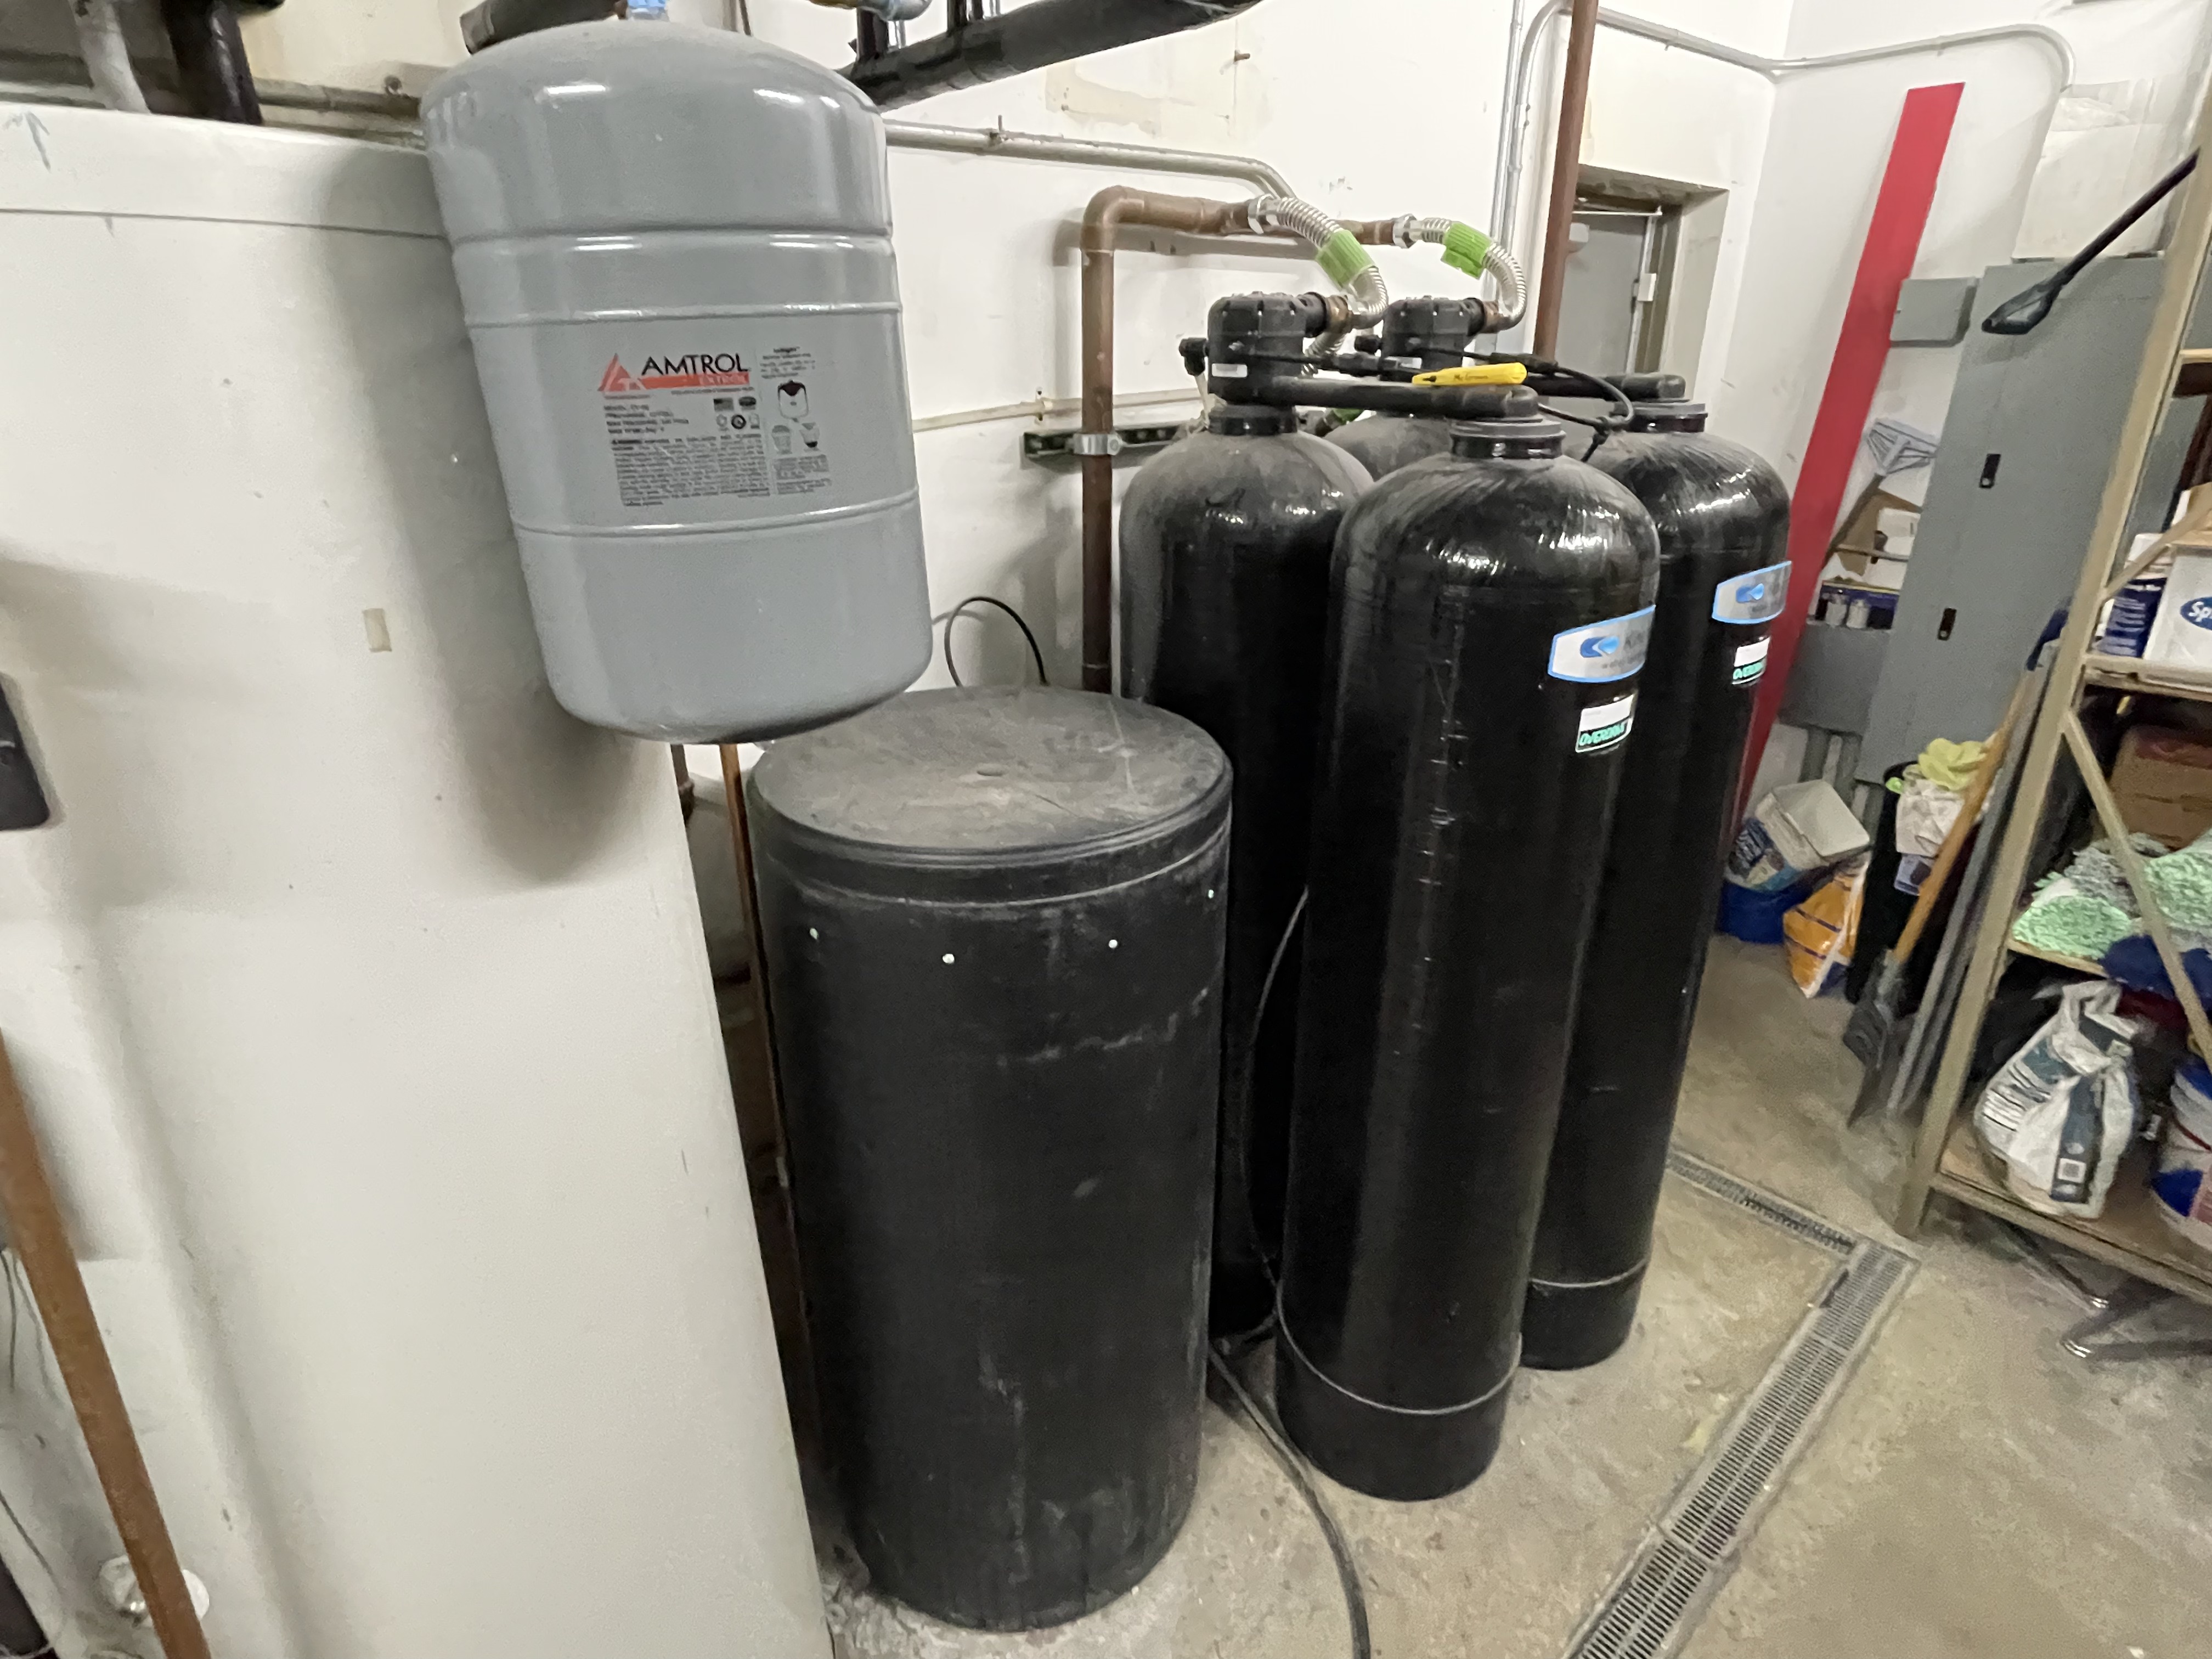 Commercial Water Softener Installation at Laundromania in Davenport, Iowa